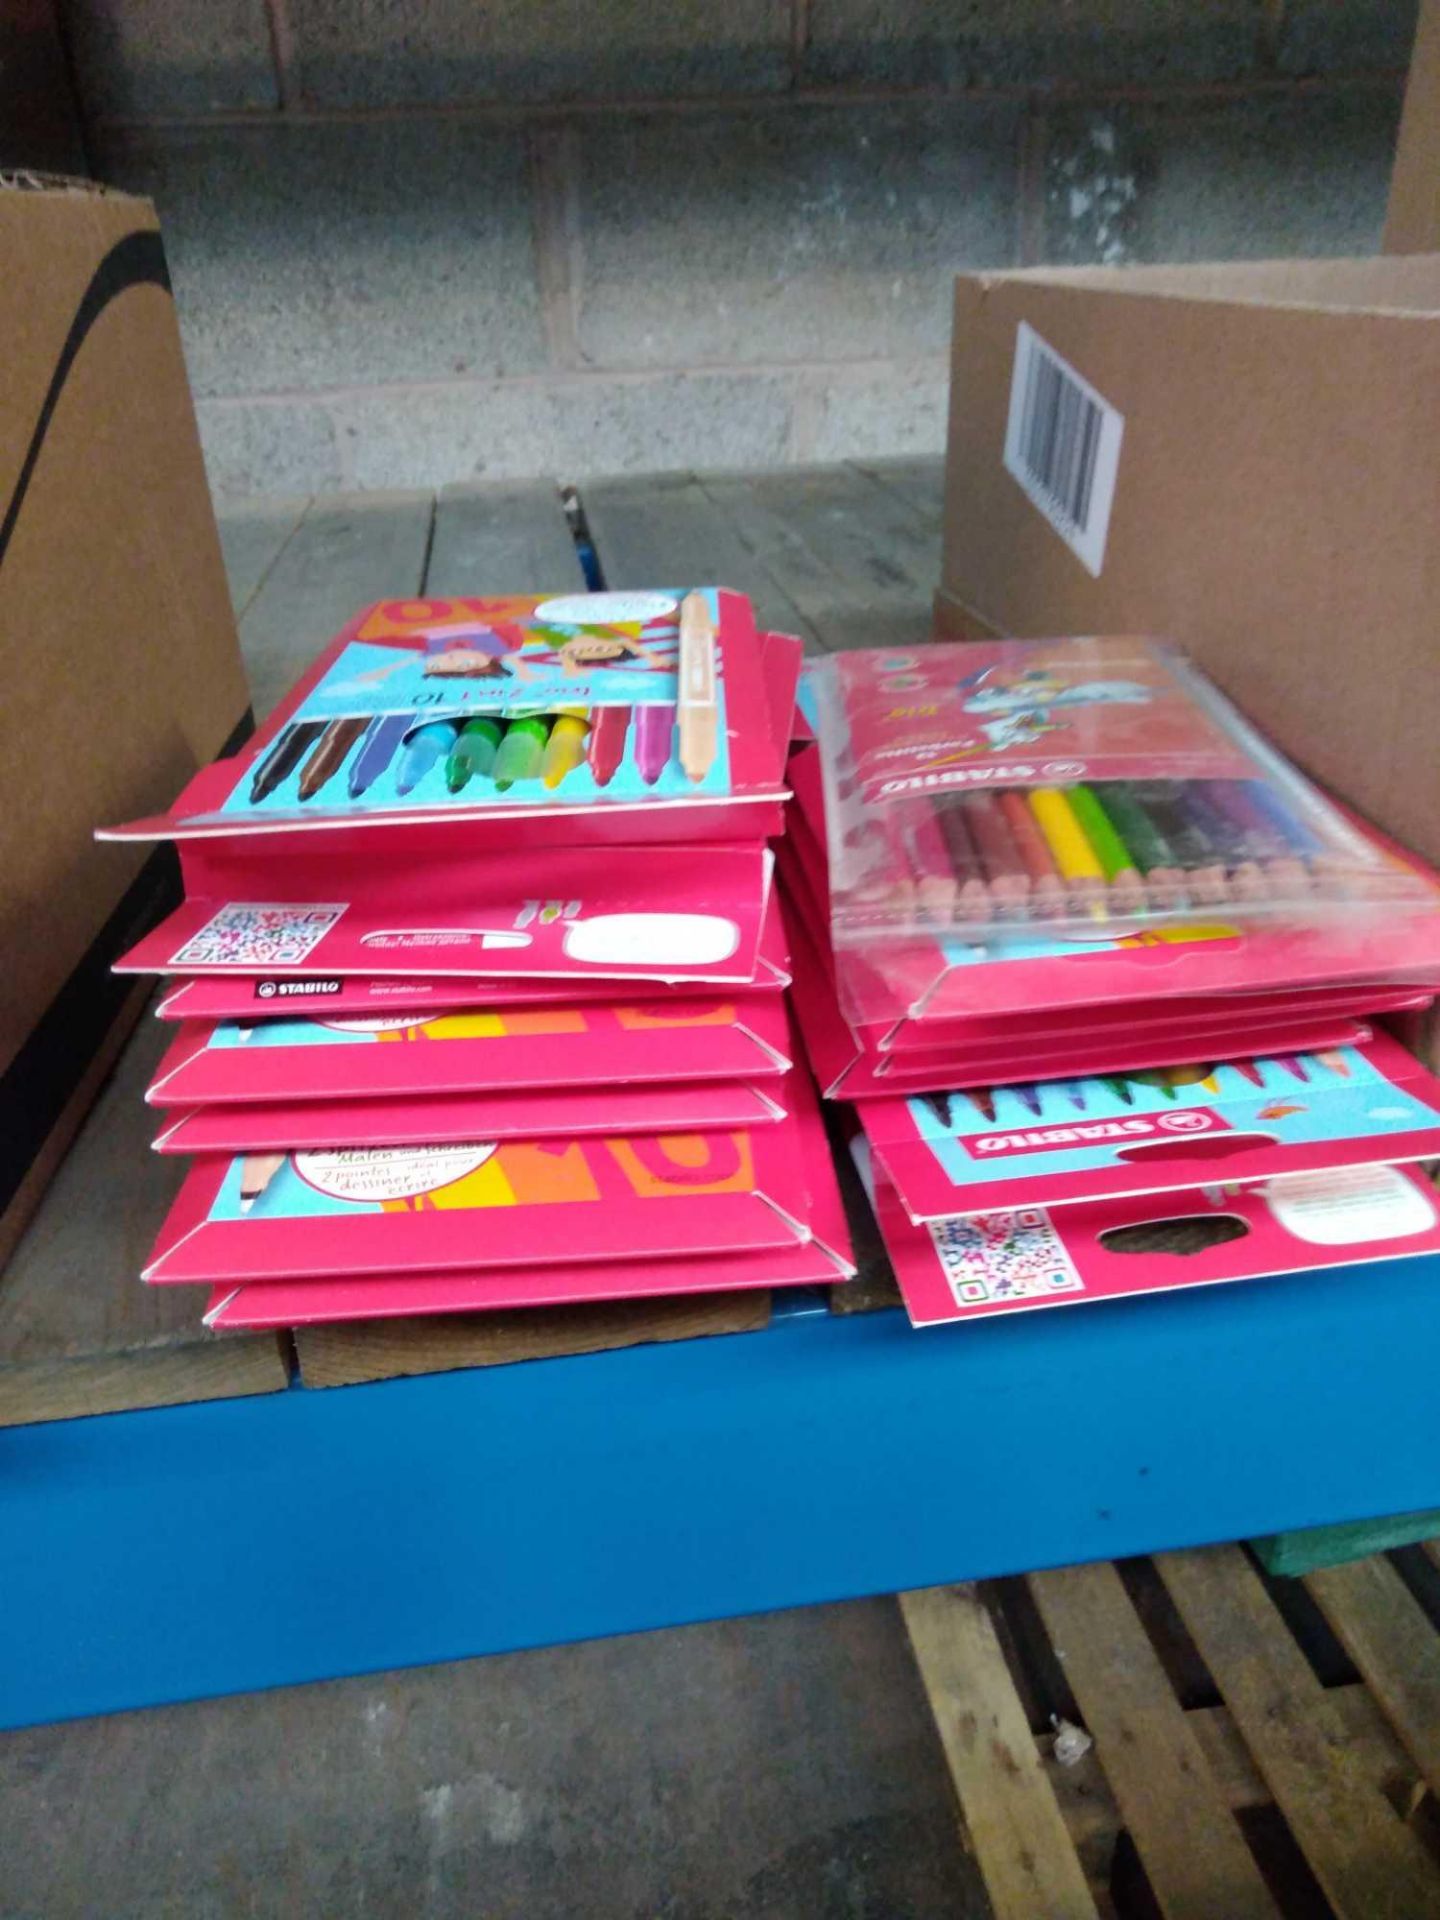 1 LOT TO CONTAIN 16 X PACKS OF COLOURED FELT TIP PENS AND 1 X PACK OF PENCIL CRAYONS